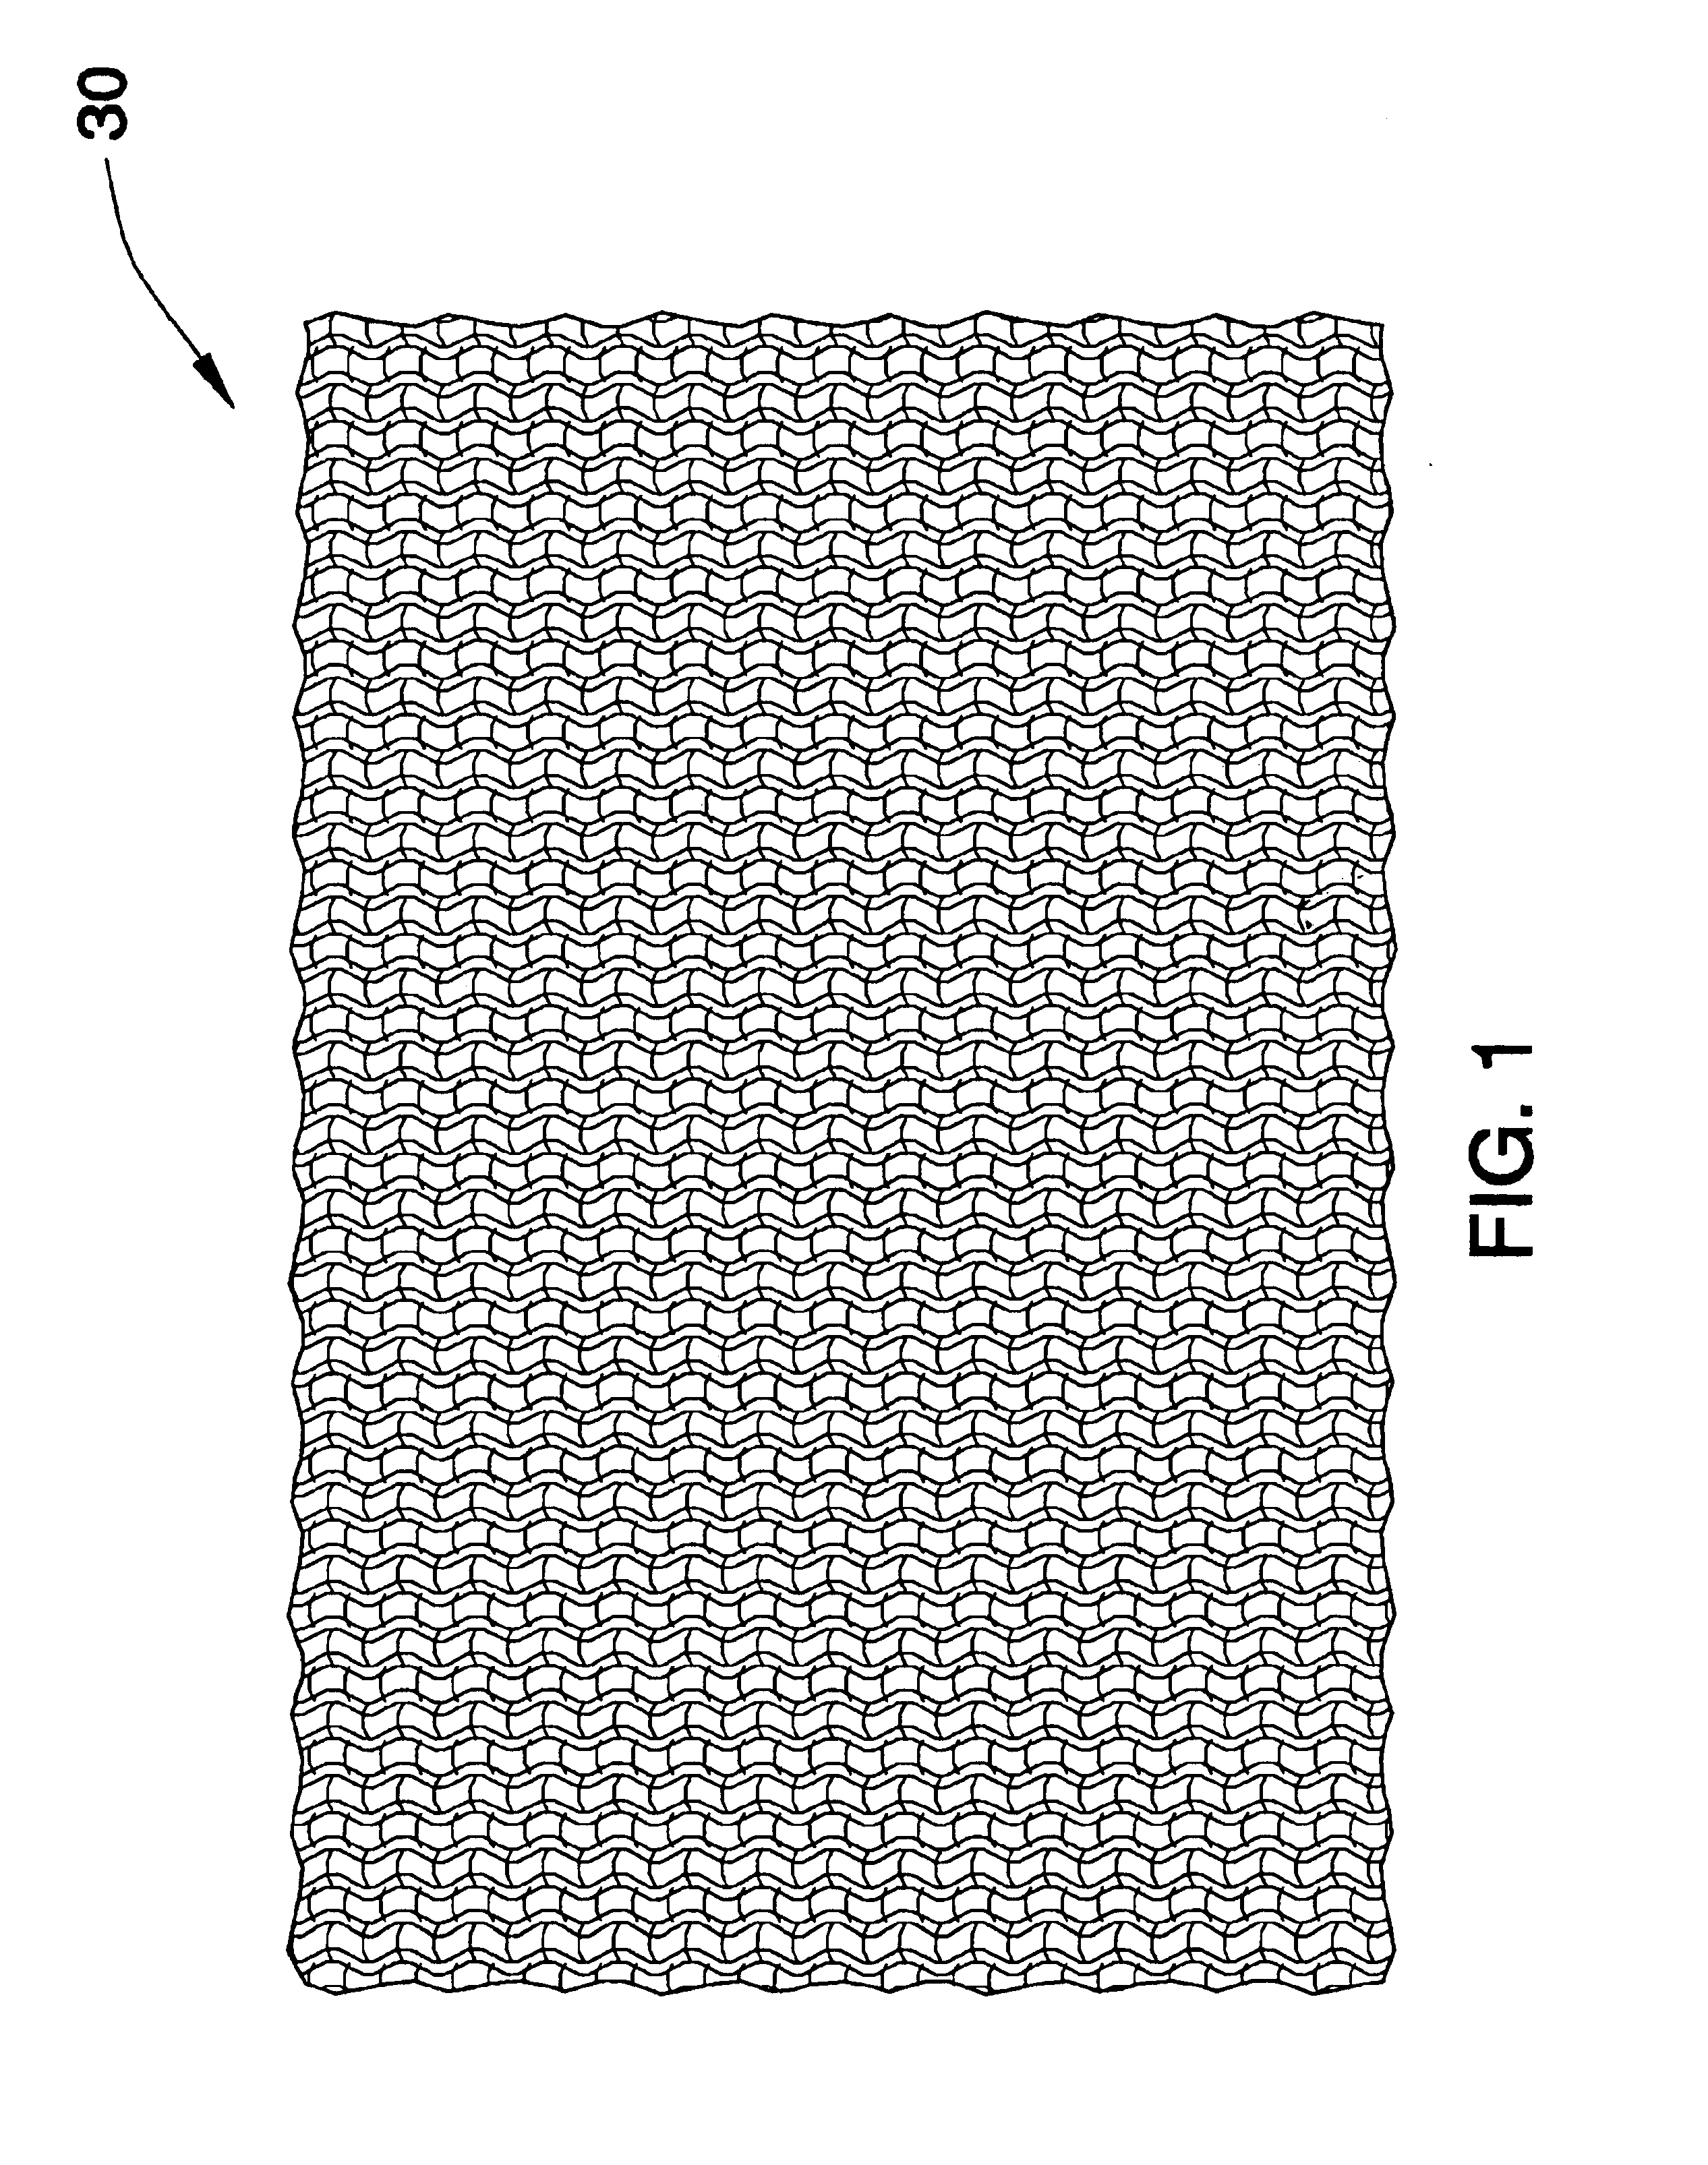 Method for hand-crafting a rug